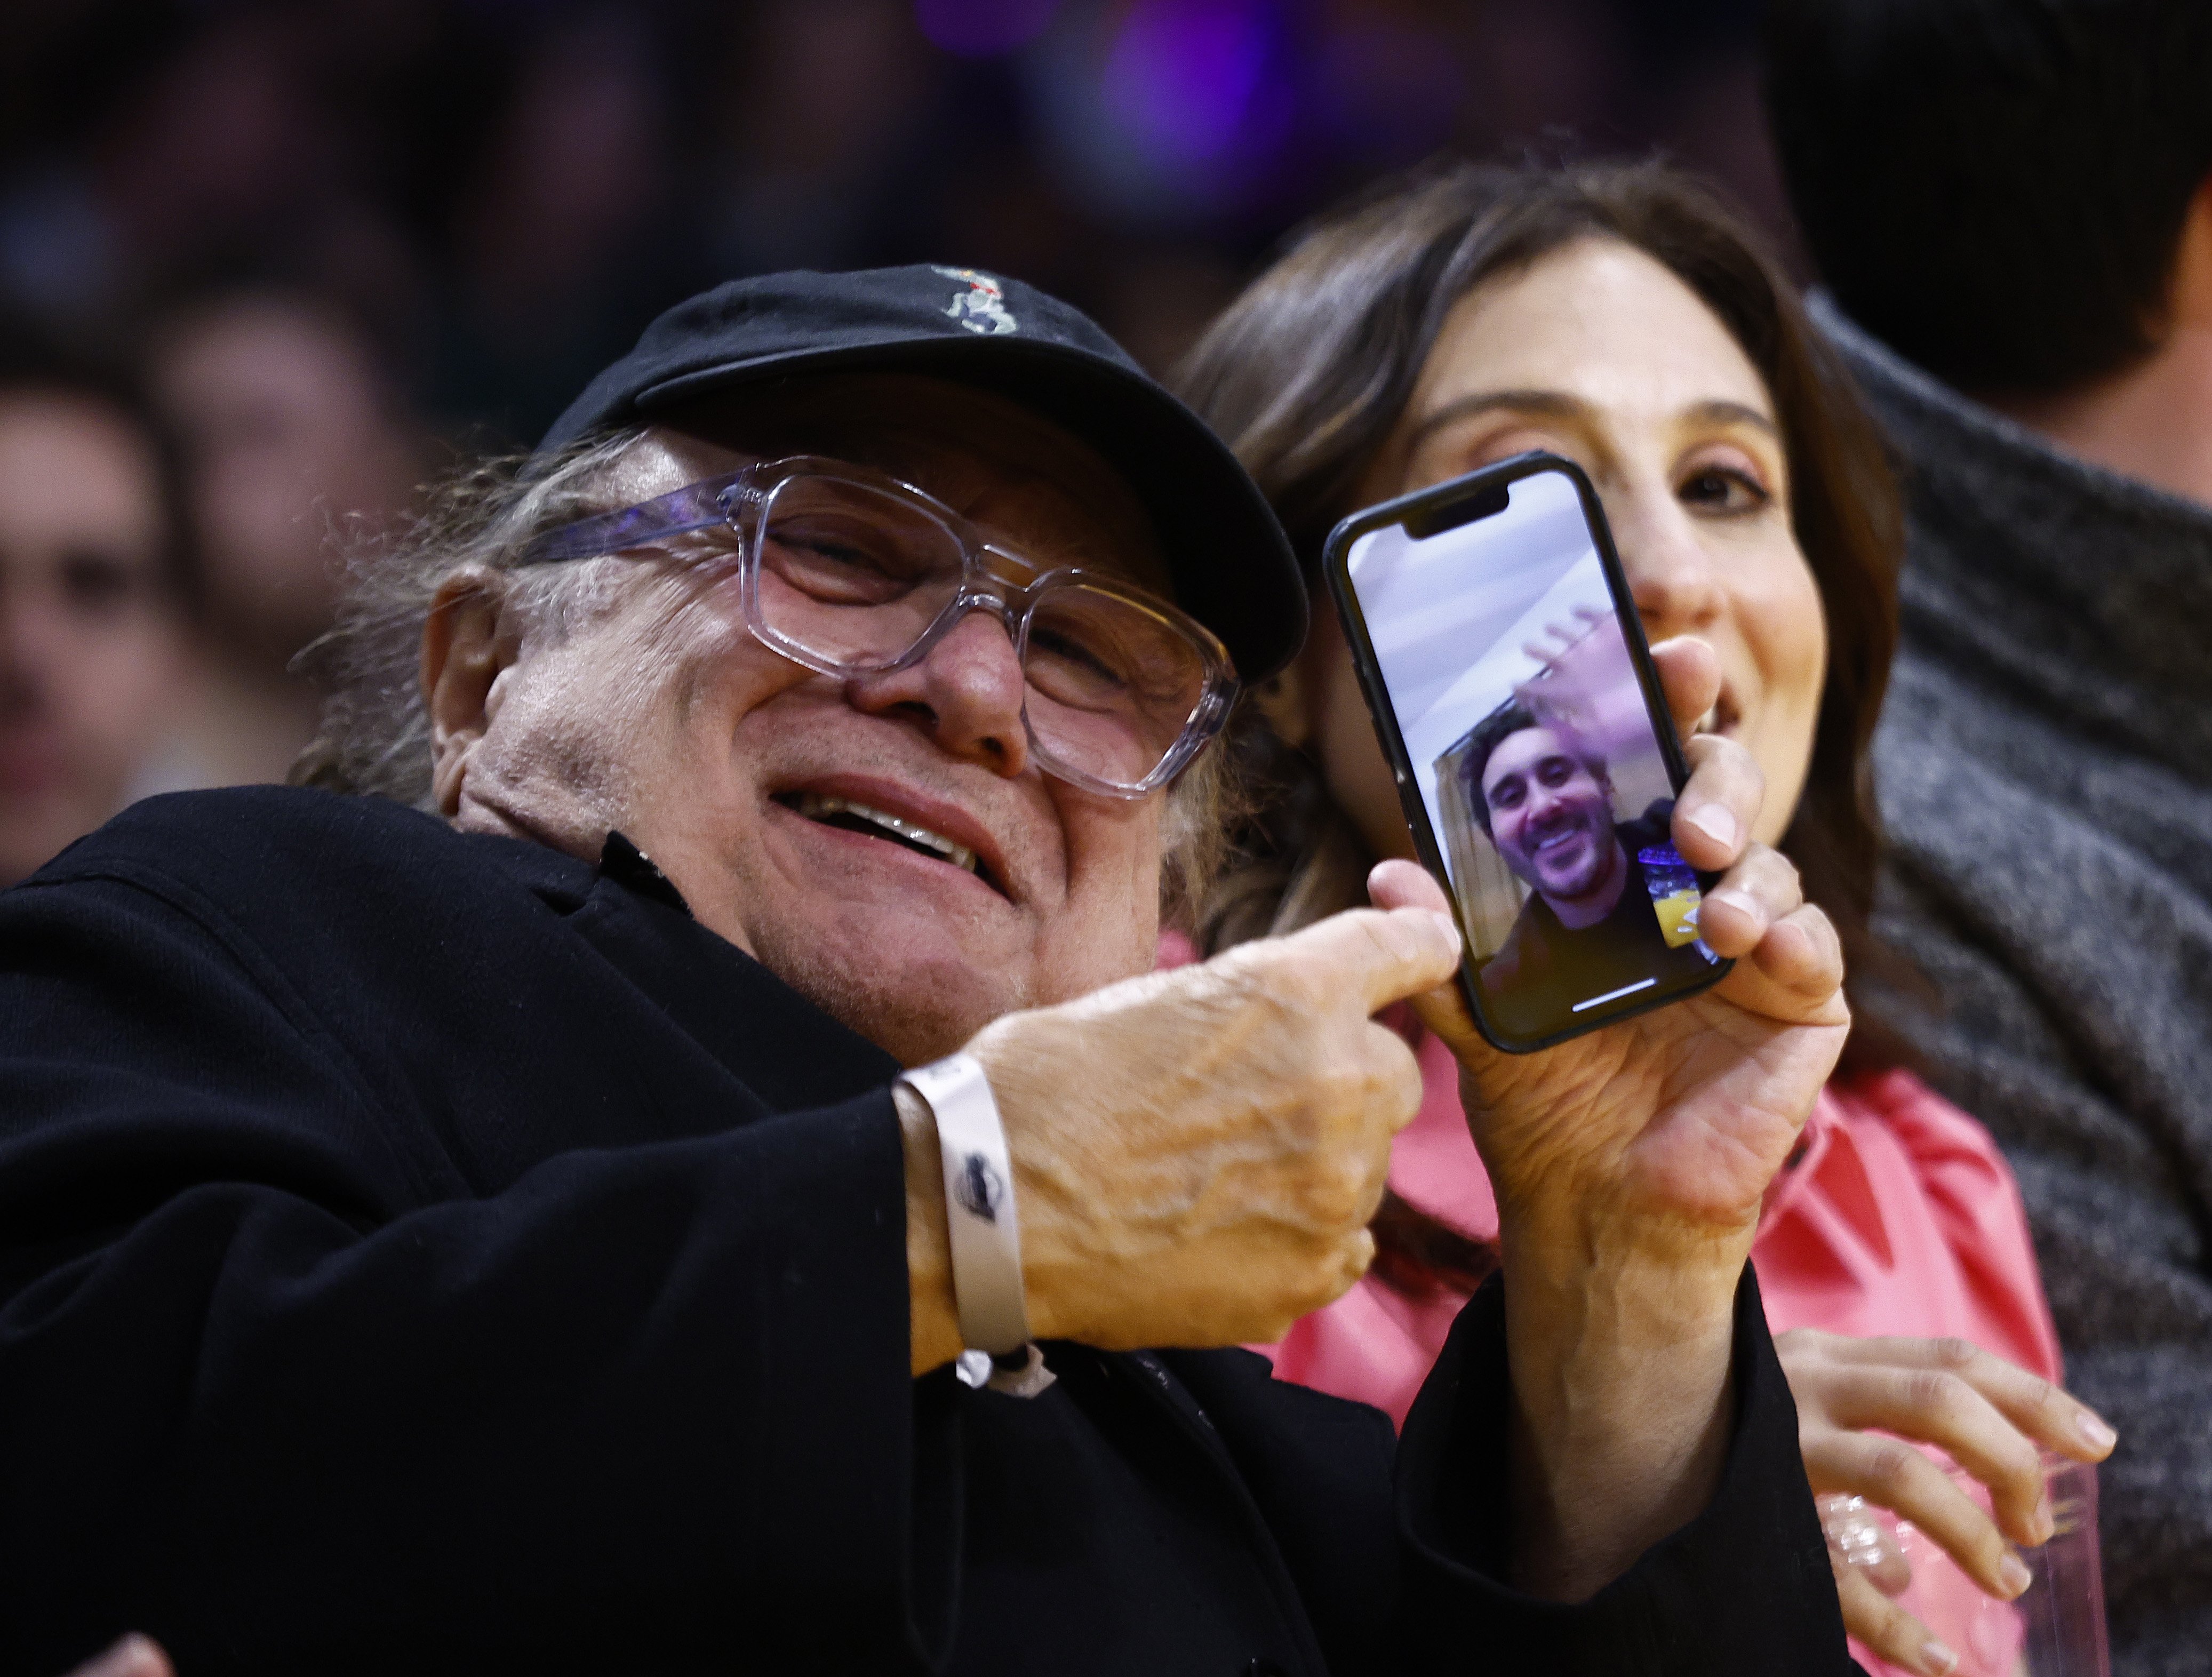  Danny DeVito and Lucy DeVito at Crypto.com Arena on January 18, 2023 in Los Angeles, California | Source: Getty Images